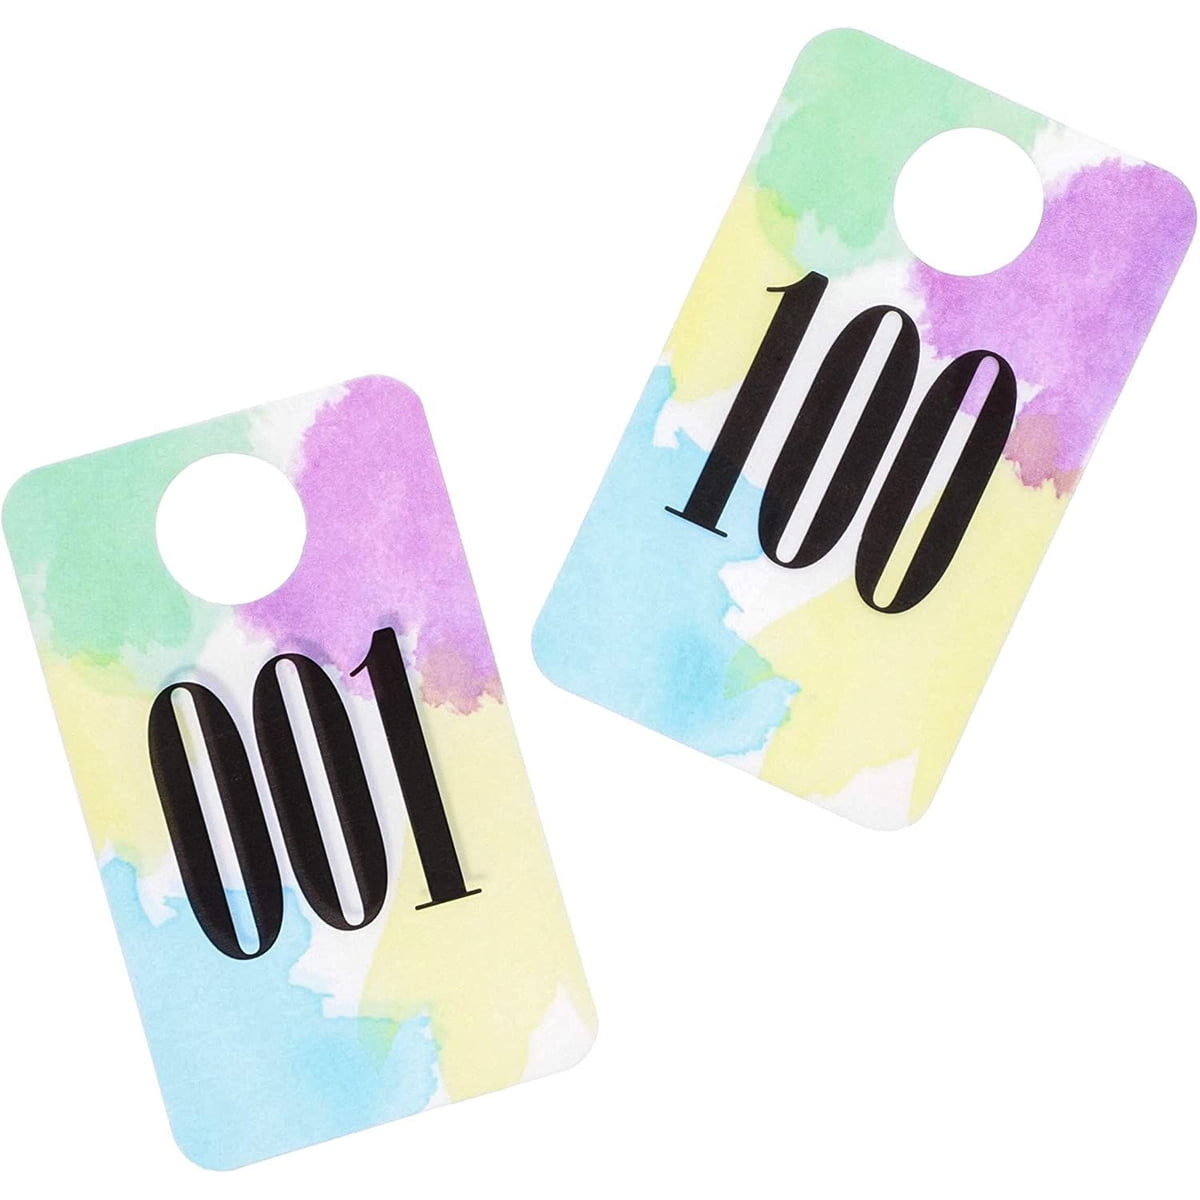 001-999 Number Series Reusable Normal and Reverse Mirror Image Hanger Cards 001-100 Live Sale Plastic Tags Select a Set of 100 Numbers, 